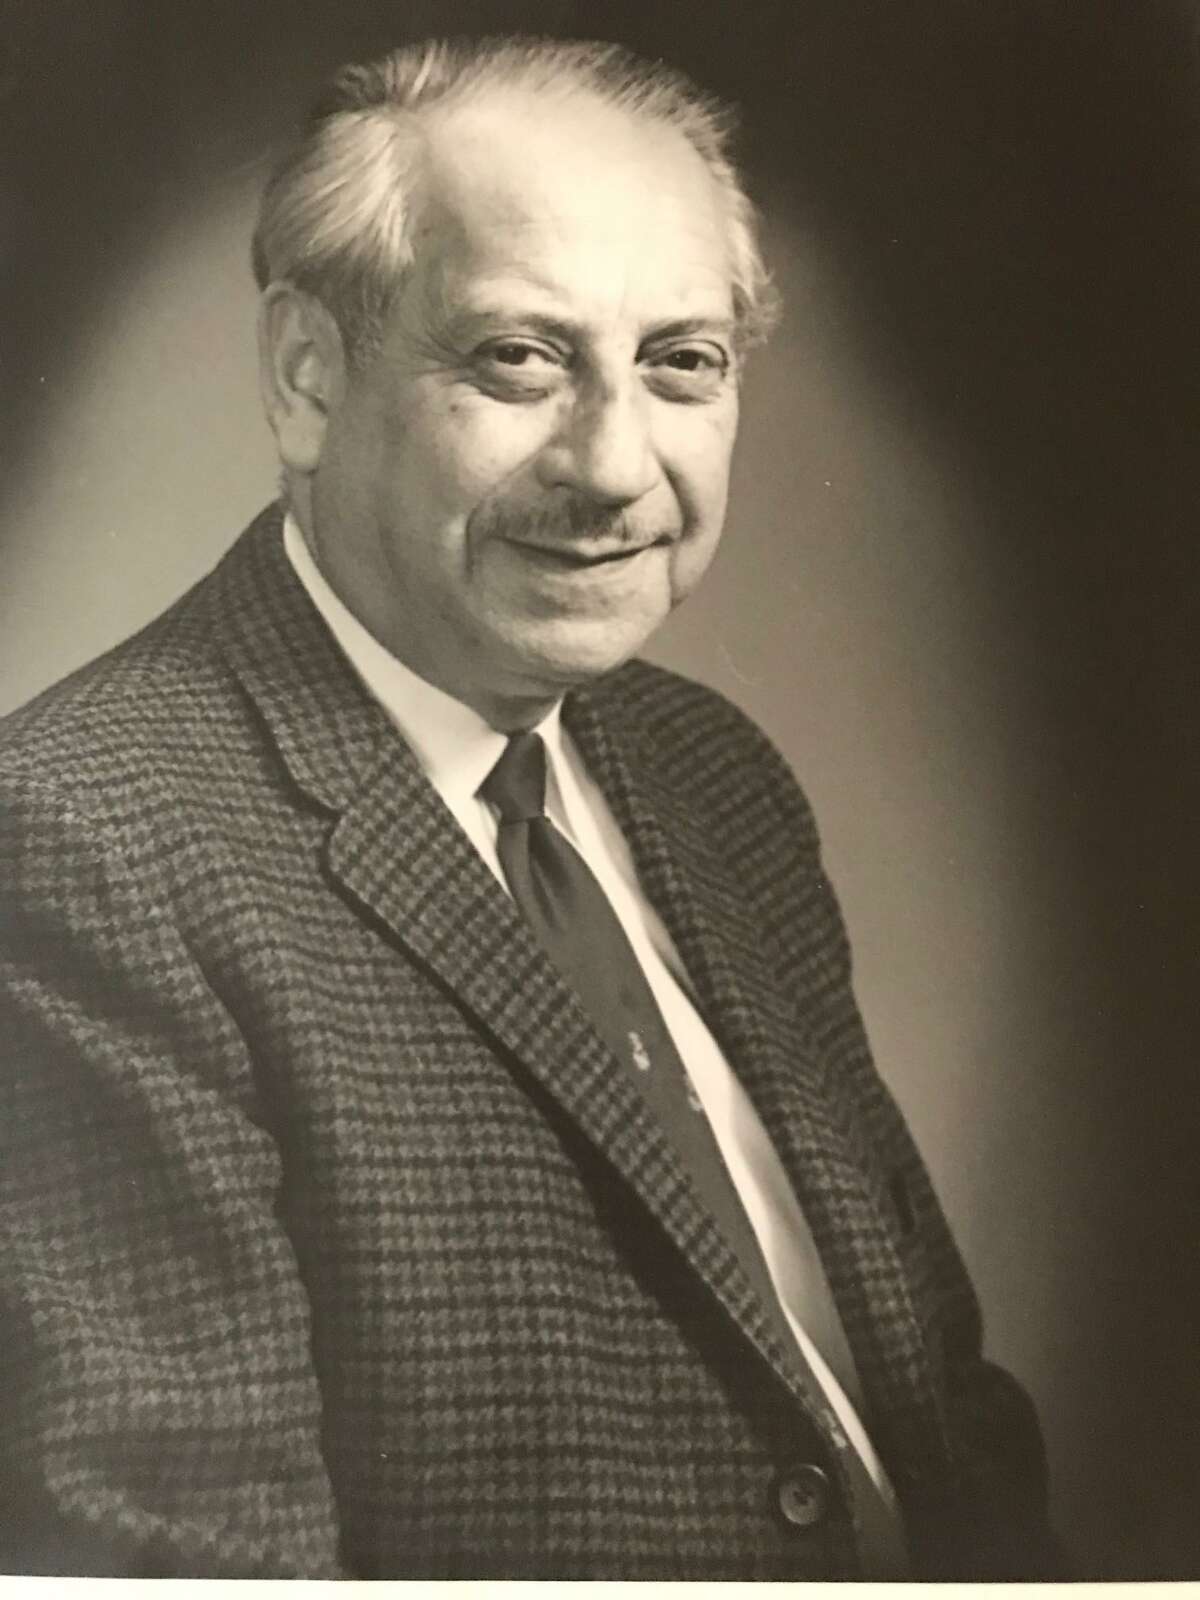 Dr. Louis Soreff was the general practitioner in East Hampton during the 1930s to 1960s. His son Stephen Soreff will share stories about his dad at the Library Community Room Feb. 23.